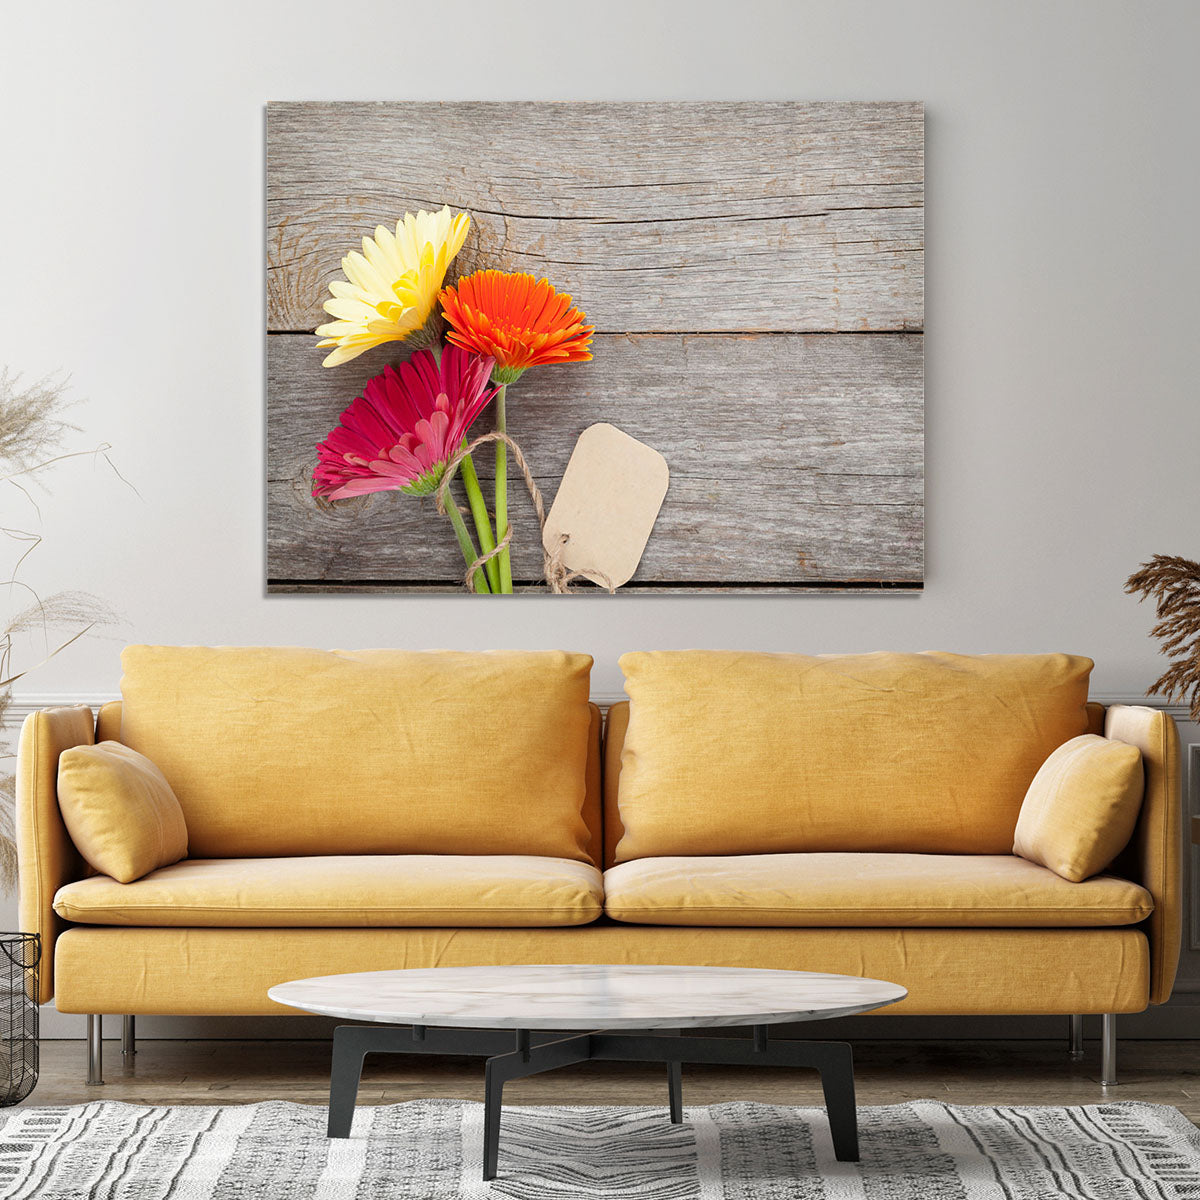 Three colorful gerbera flowers Canvas Print or Poster - Canvas Art Rocks - 4